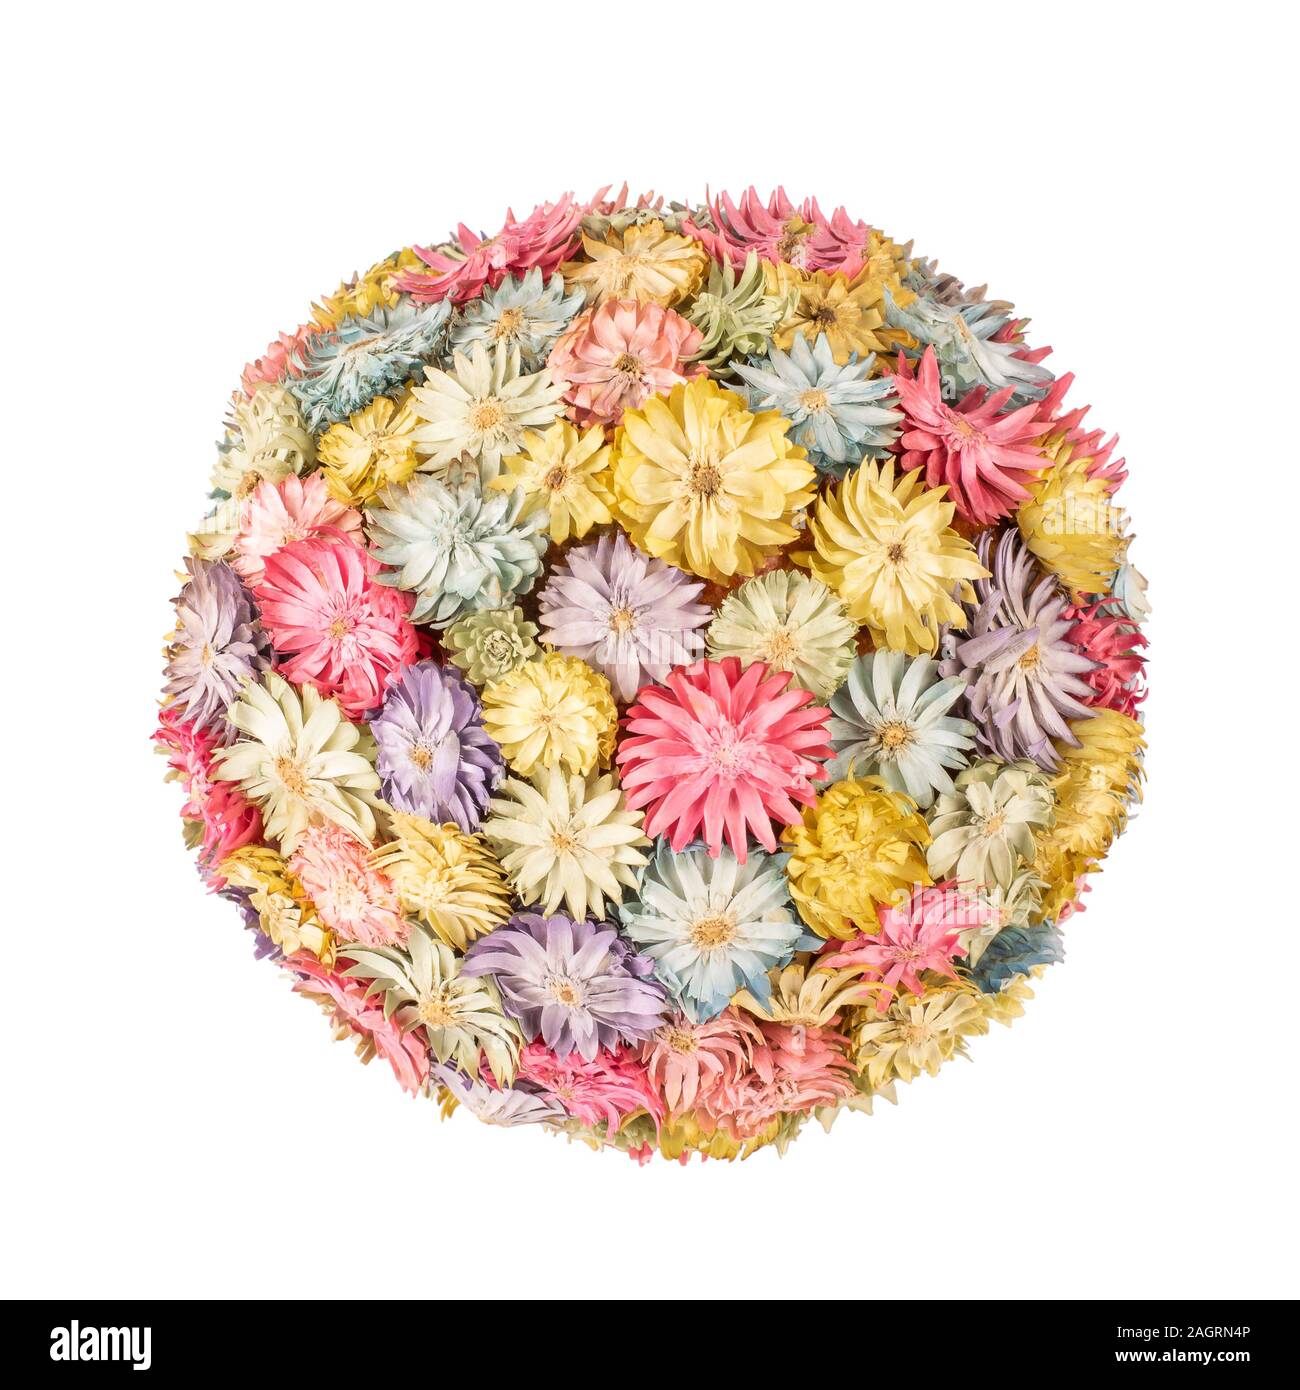 Ball of small dried multicolored flowers Stock Photo